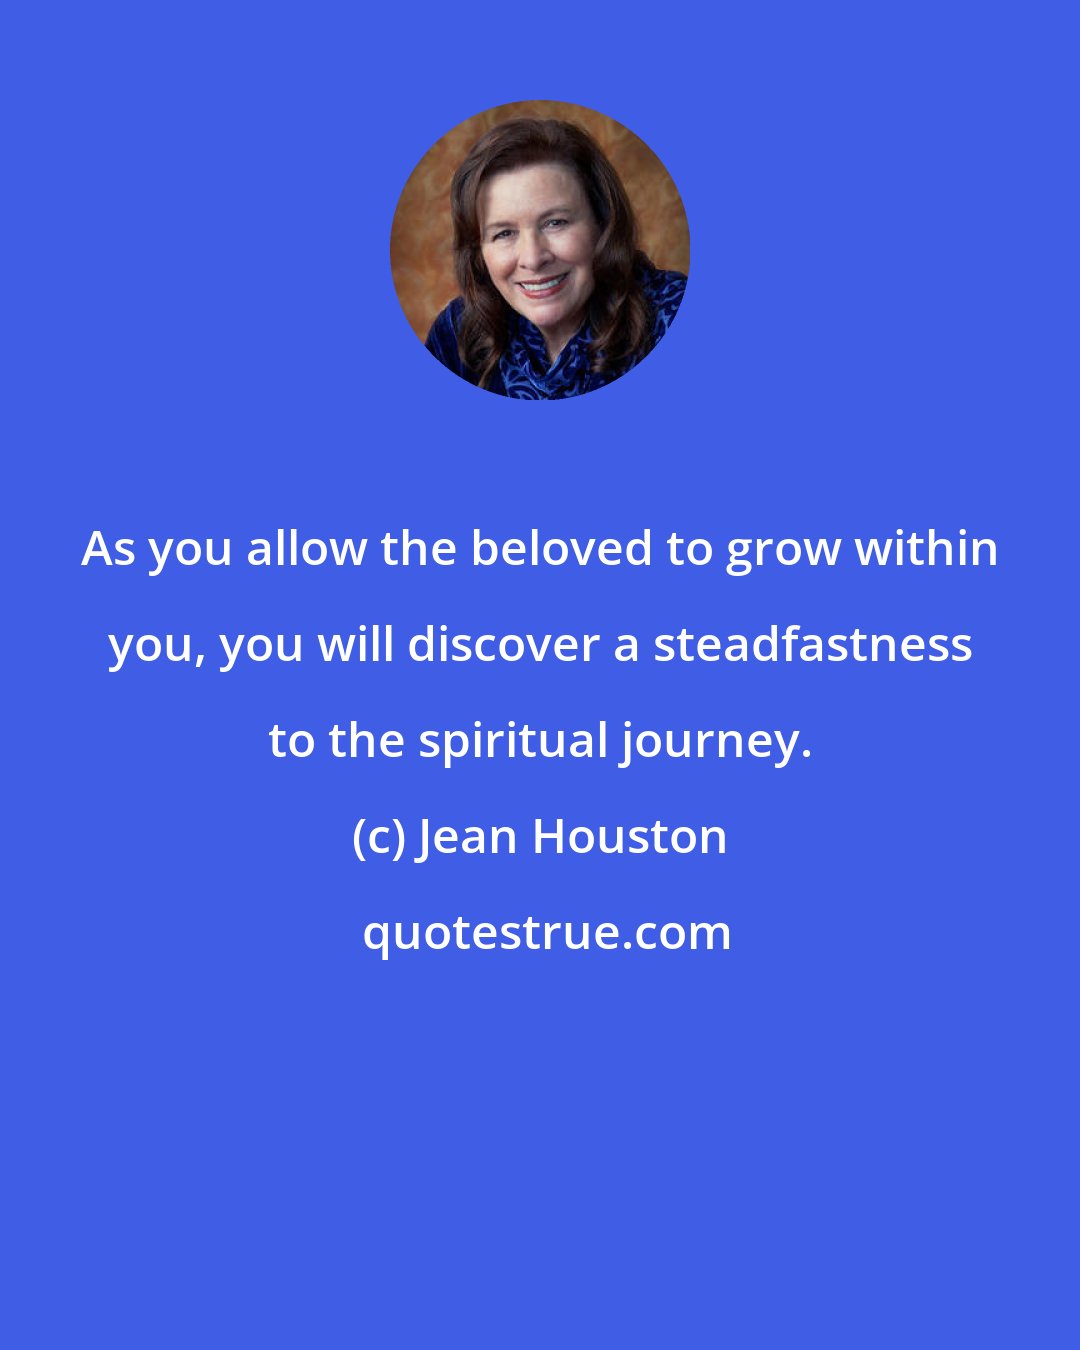 Jean Houston: As you allow the beloved to grow within you, you will discover a steadfastness to the spiritual journey.